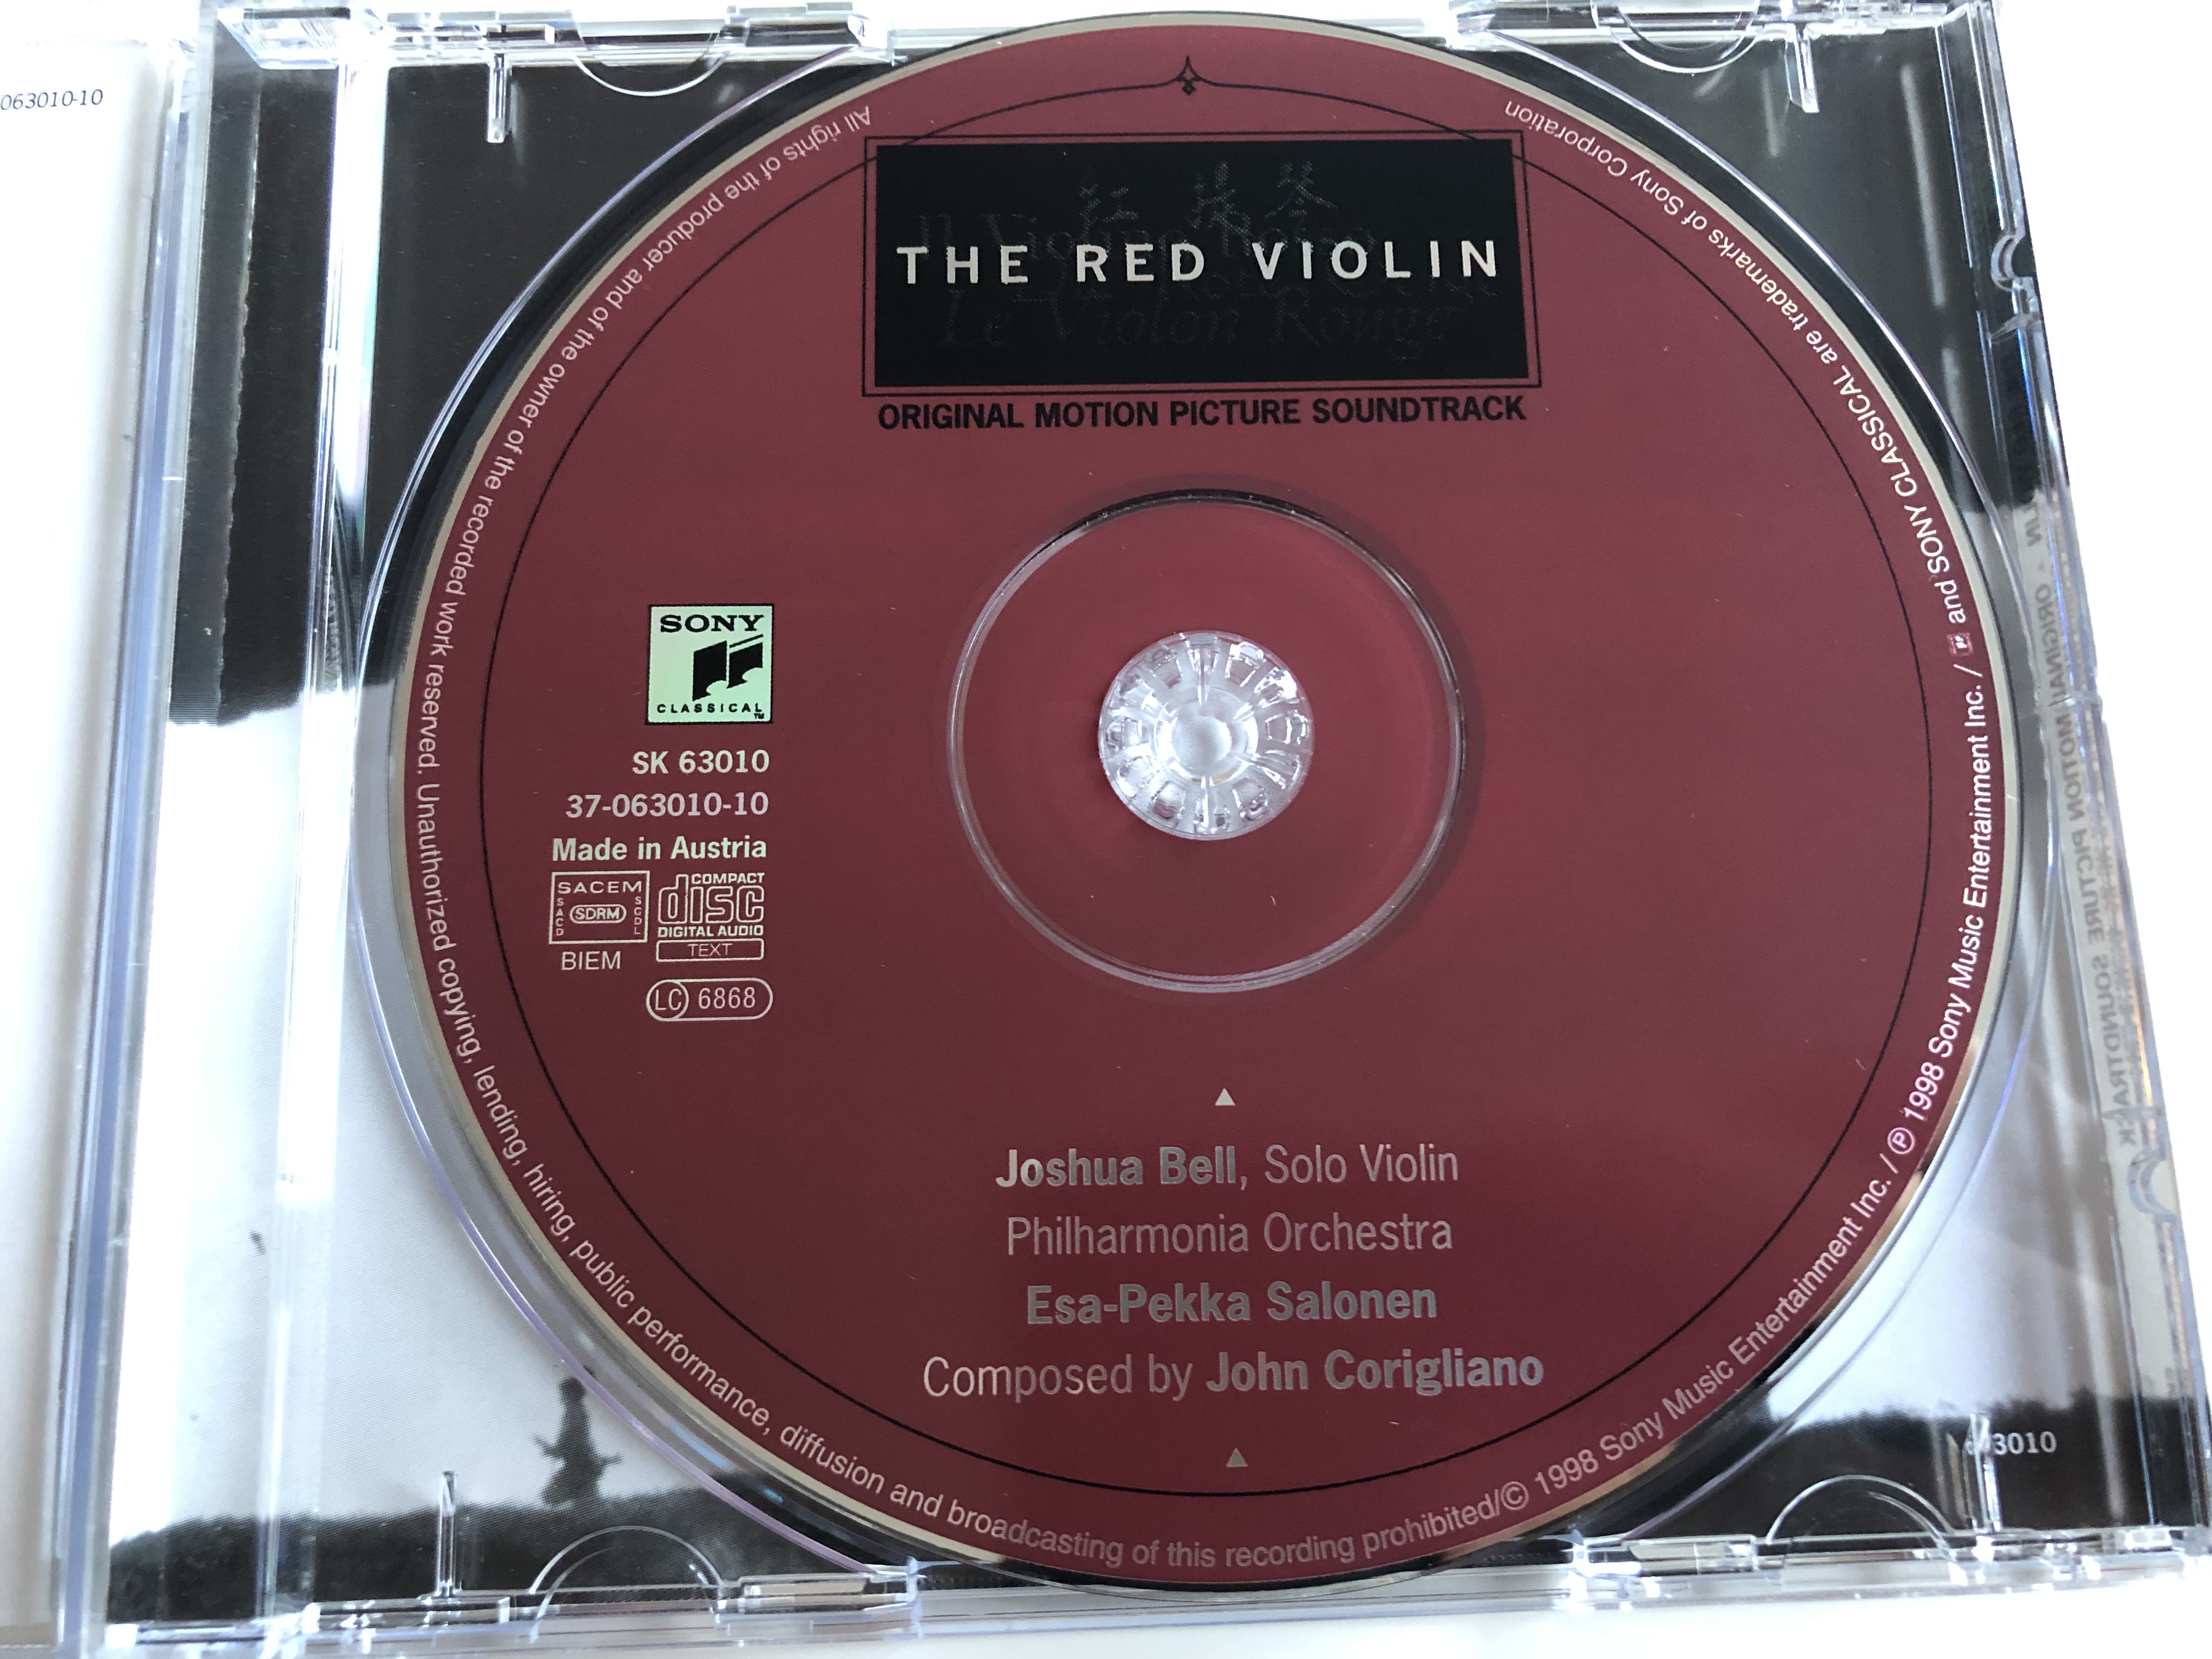 original-motion-picture-soundtrack-the-red-violin-a-film-by-francois-girard-music-composed-by-john-corigliano-joshua-bell-solo-violin-philharmonia-orchestra-conducted-by-esa-pekka-salone-7-.jpg